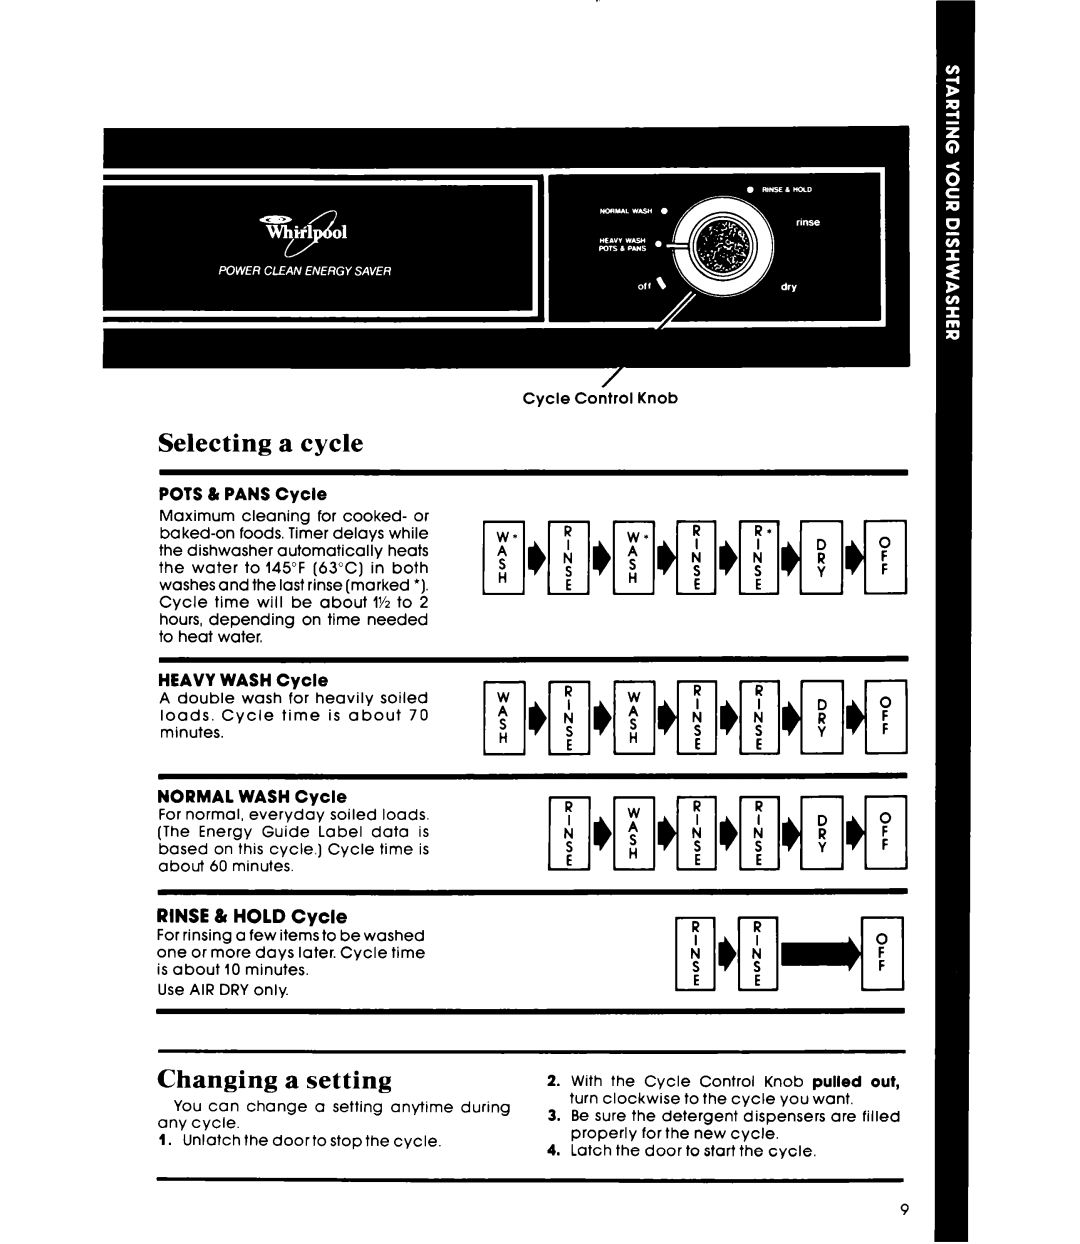 Whirlpool DU4003XL manual Selecting a cycle, Changing, a setting, RINSE & HOLD Cycle 